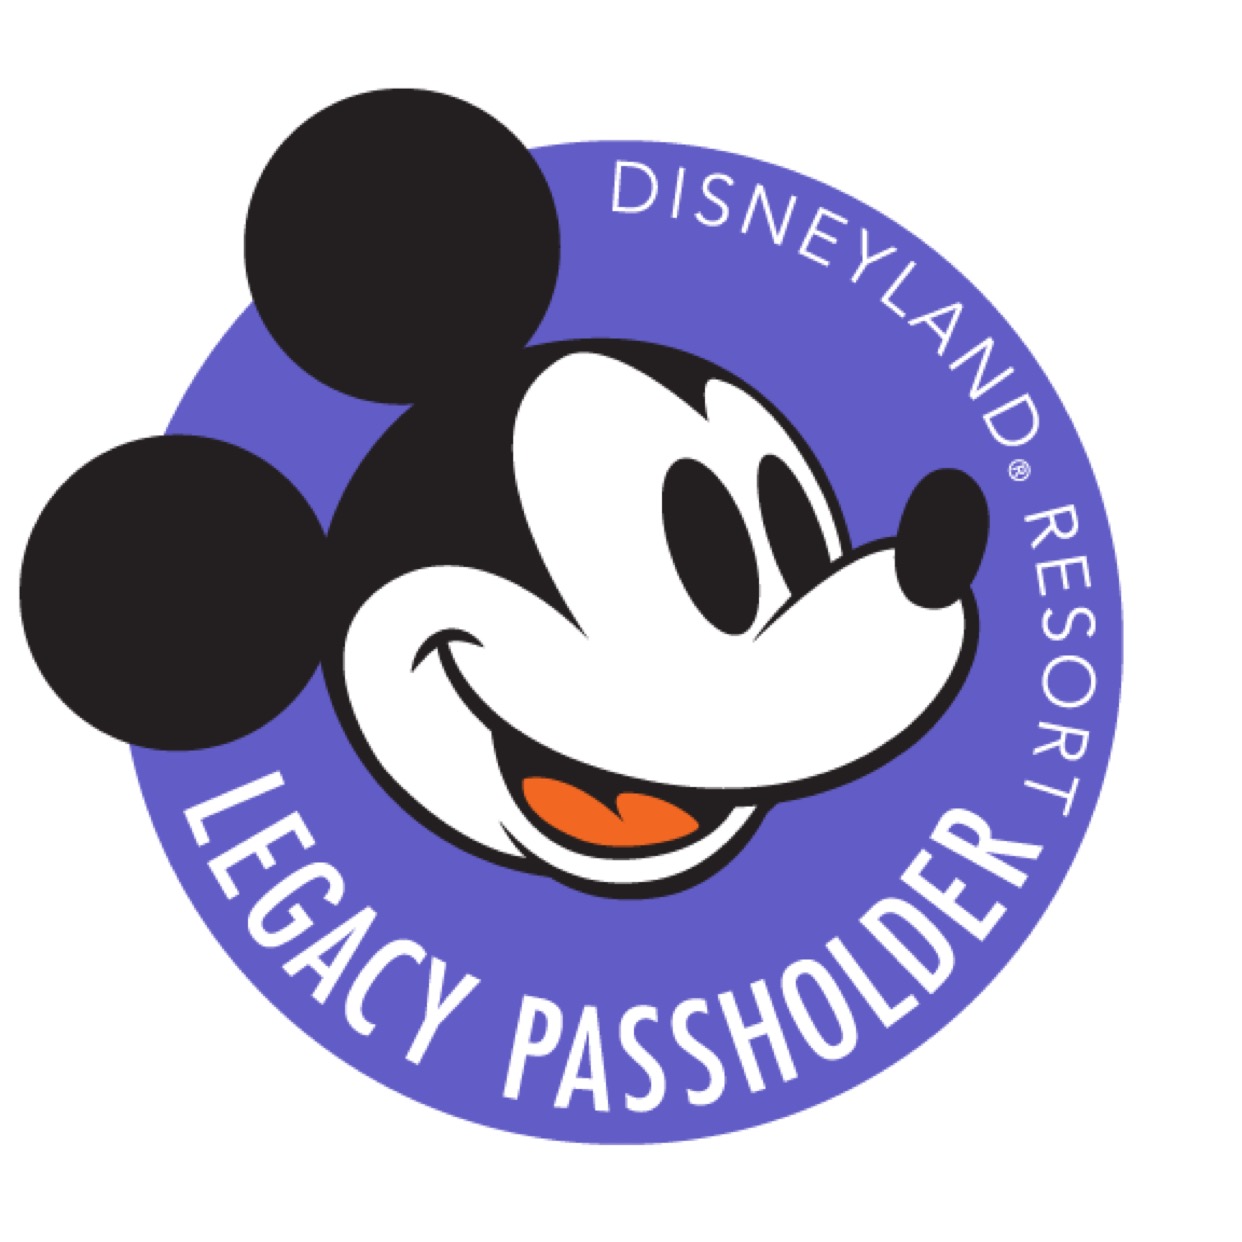 Disneyland Annual Passholder 30% off discount extended